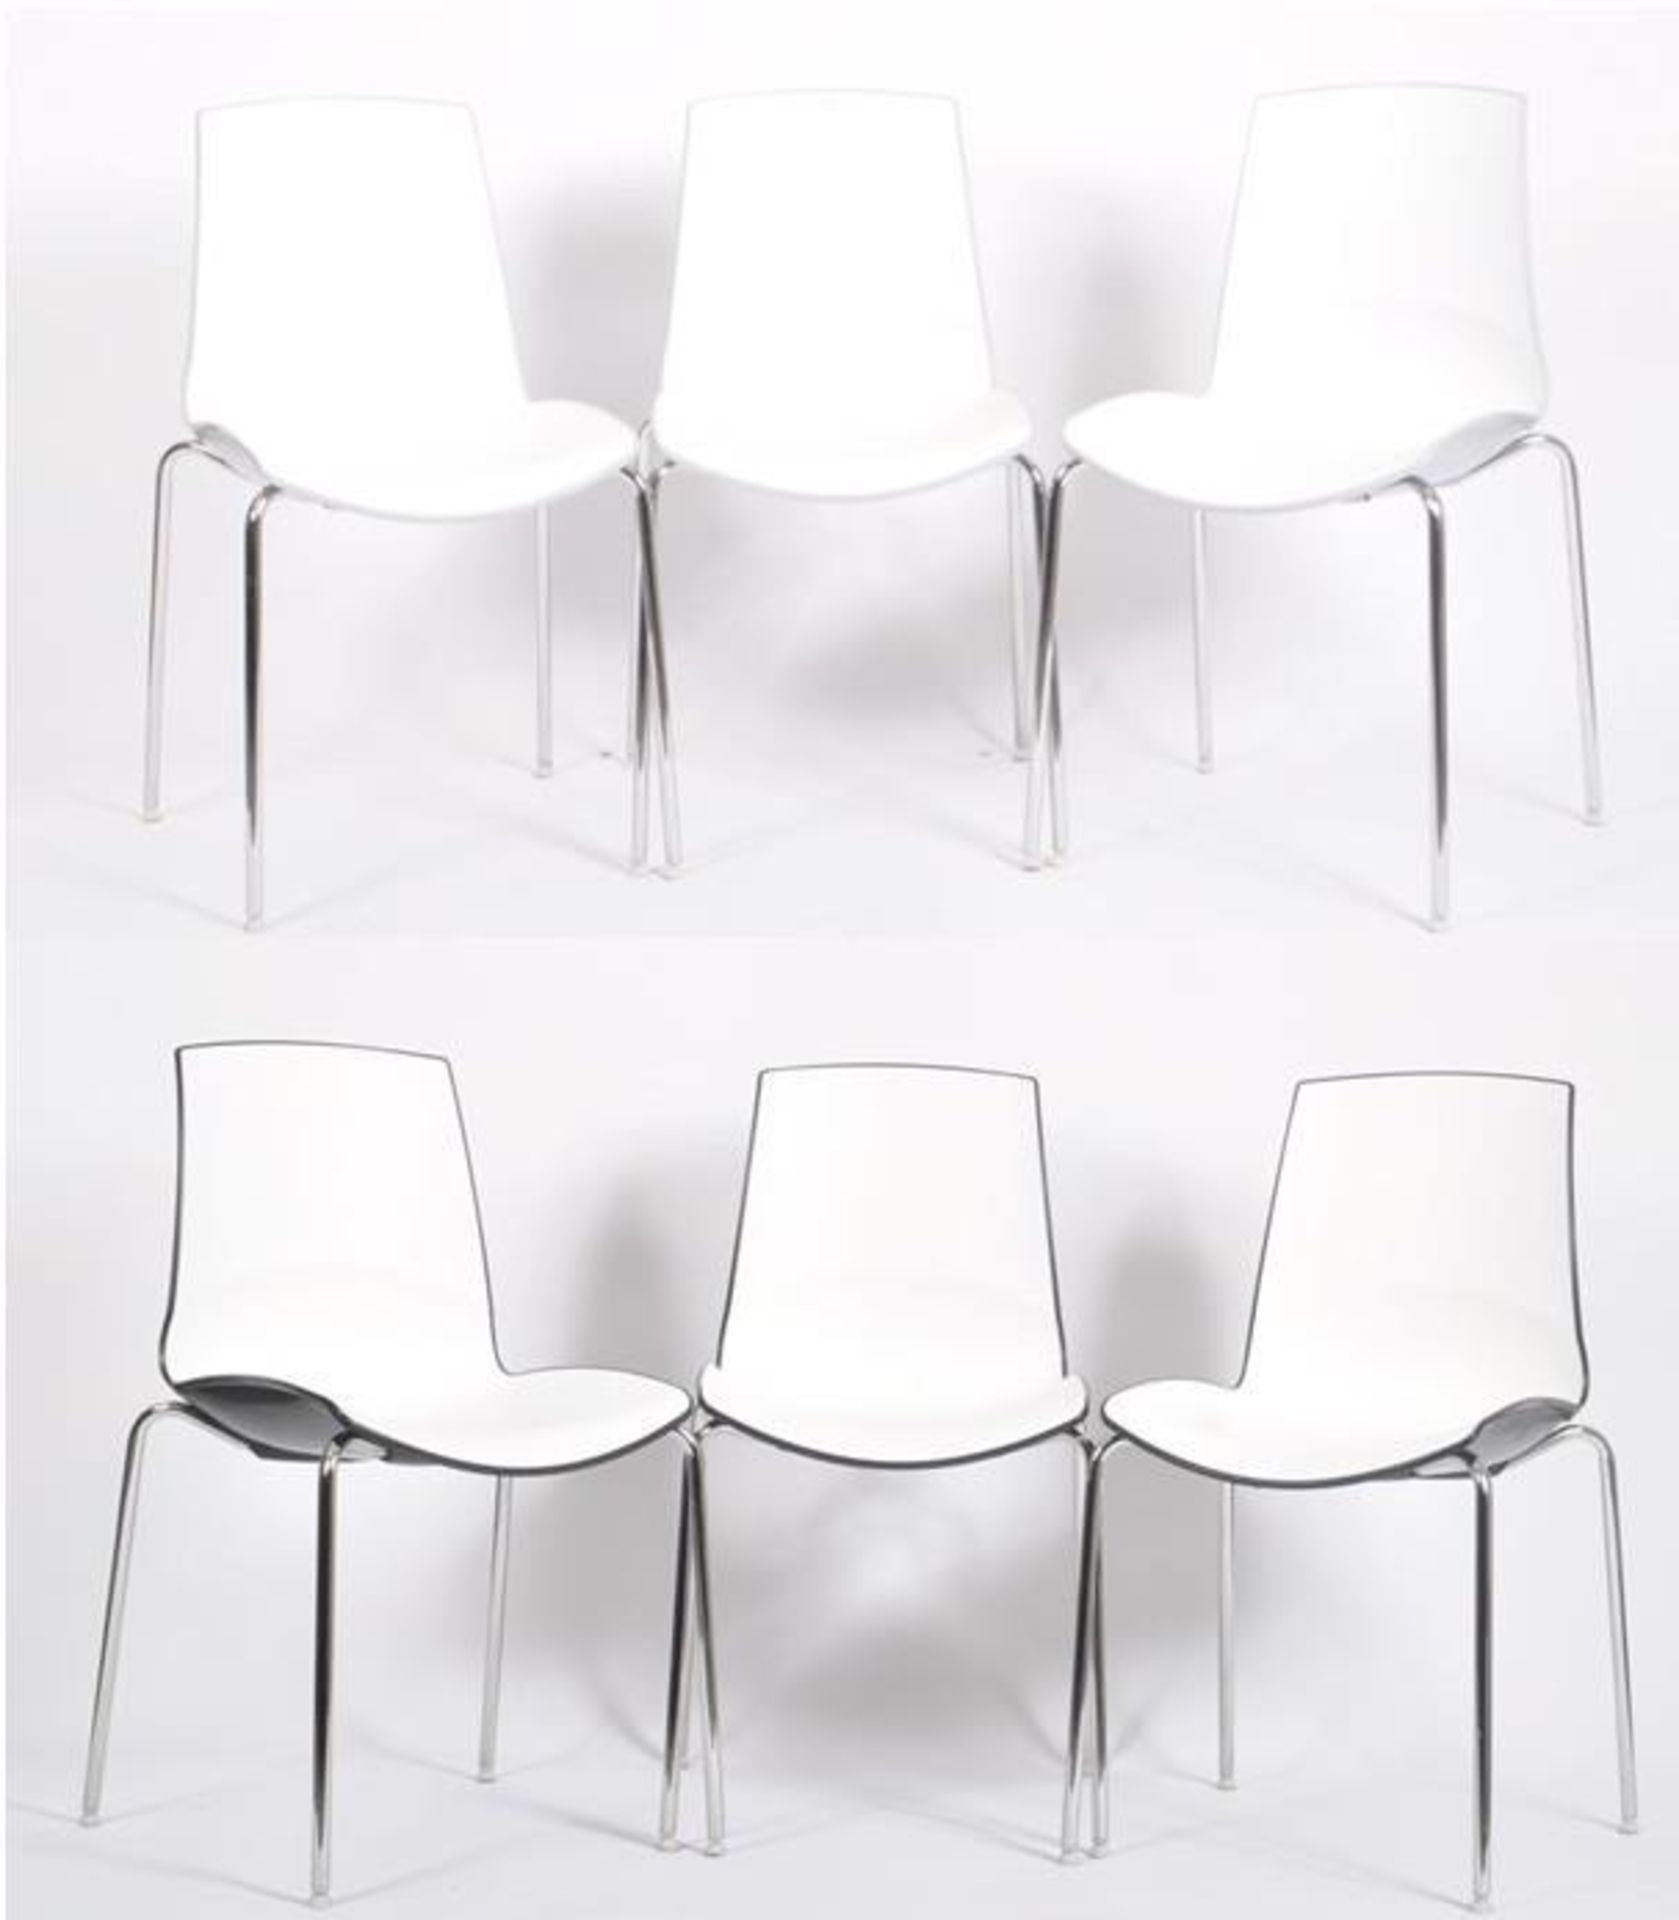 CONNECTION - SET OF SIX CONTEMPORARY DESIGNER DINING CHAIRS